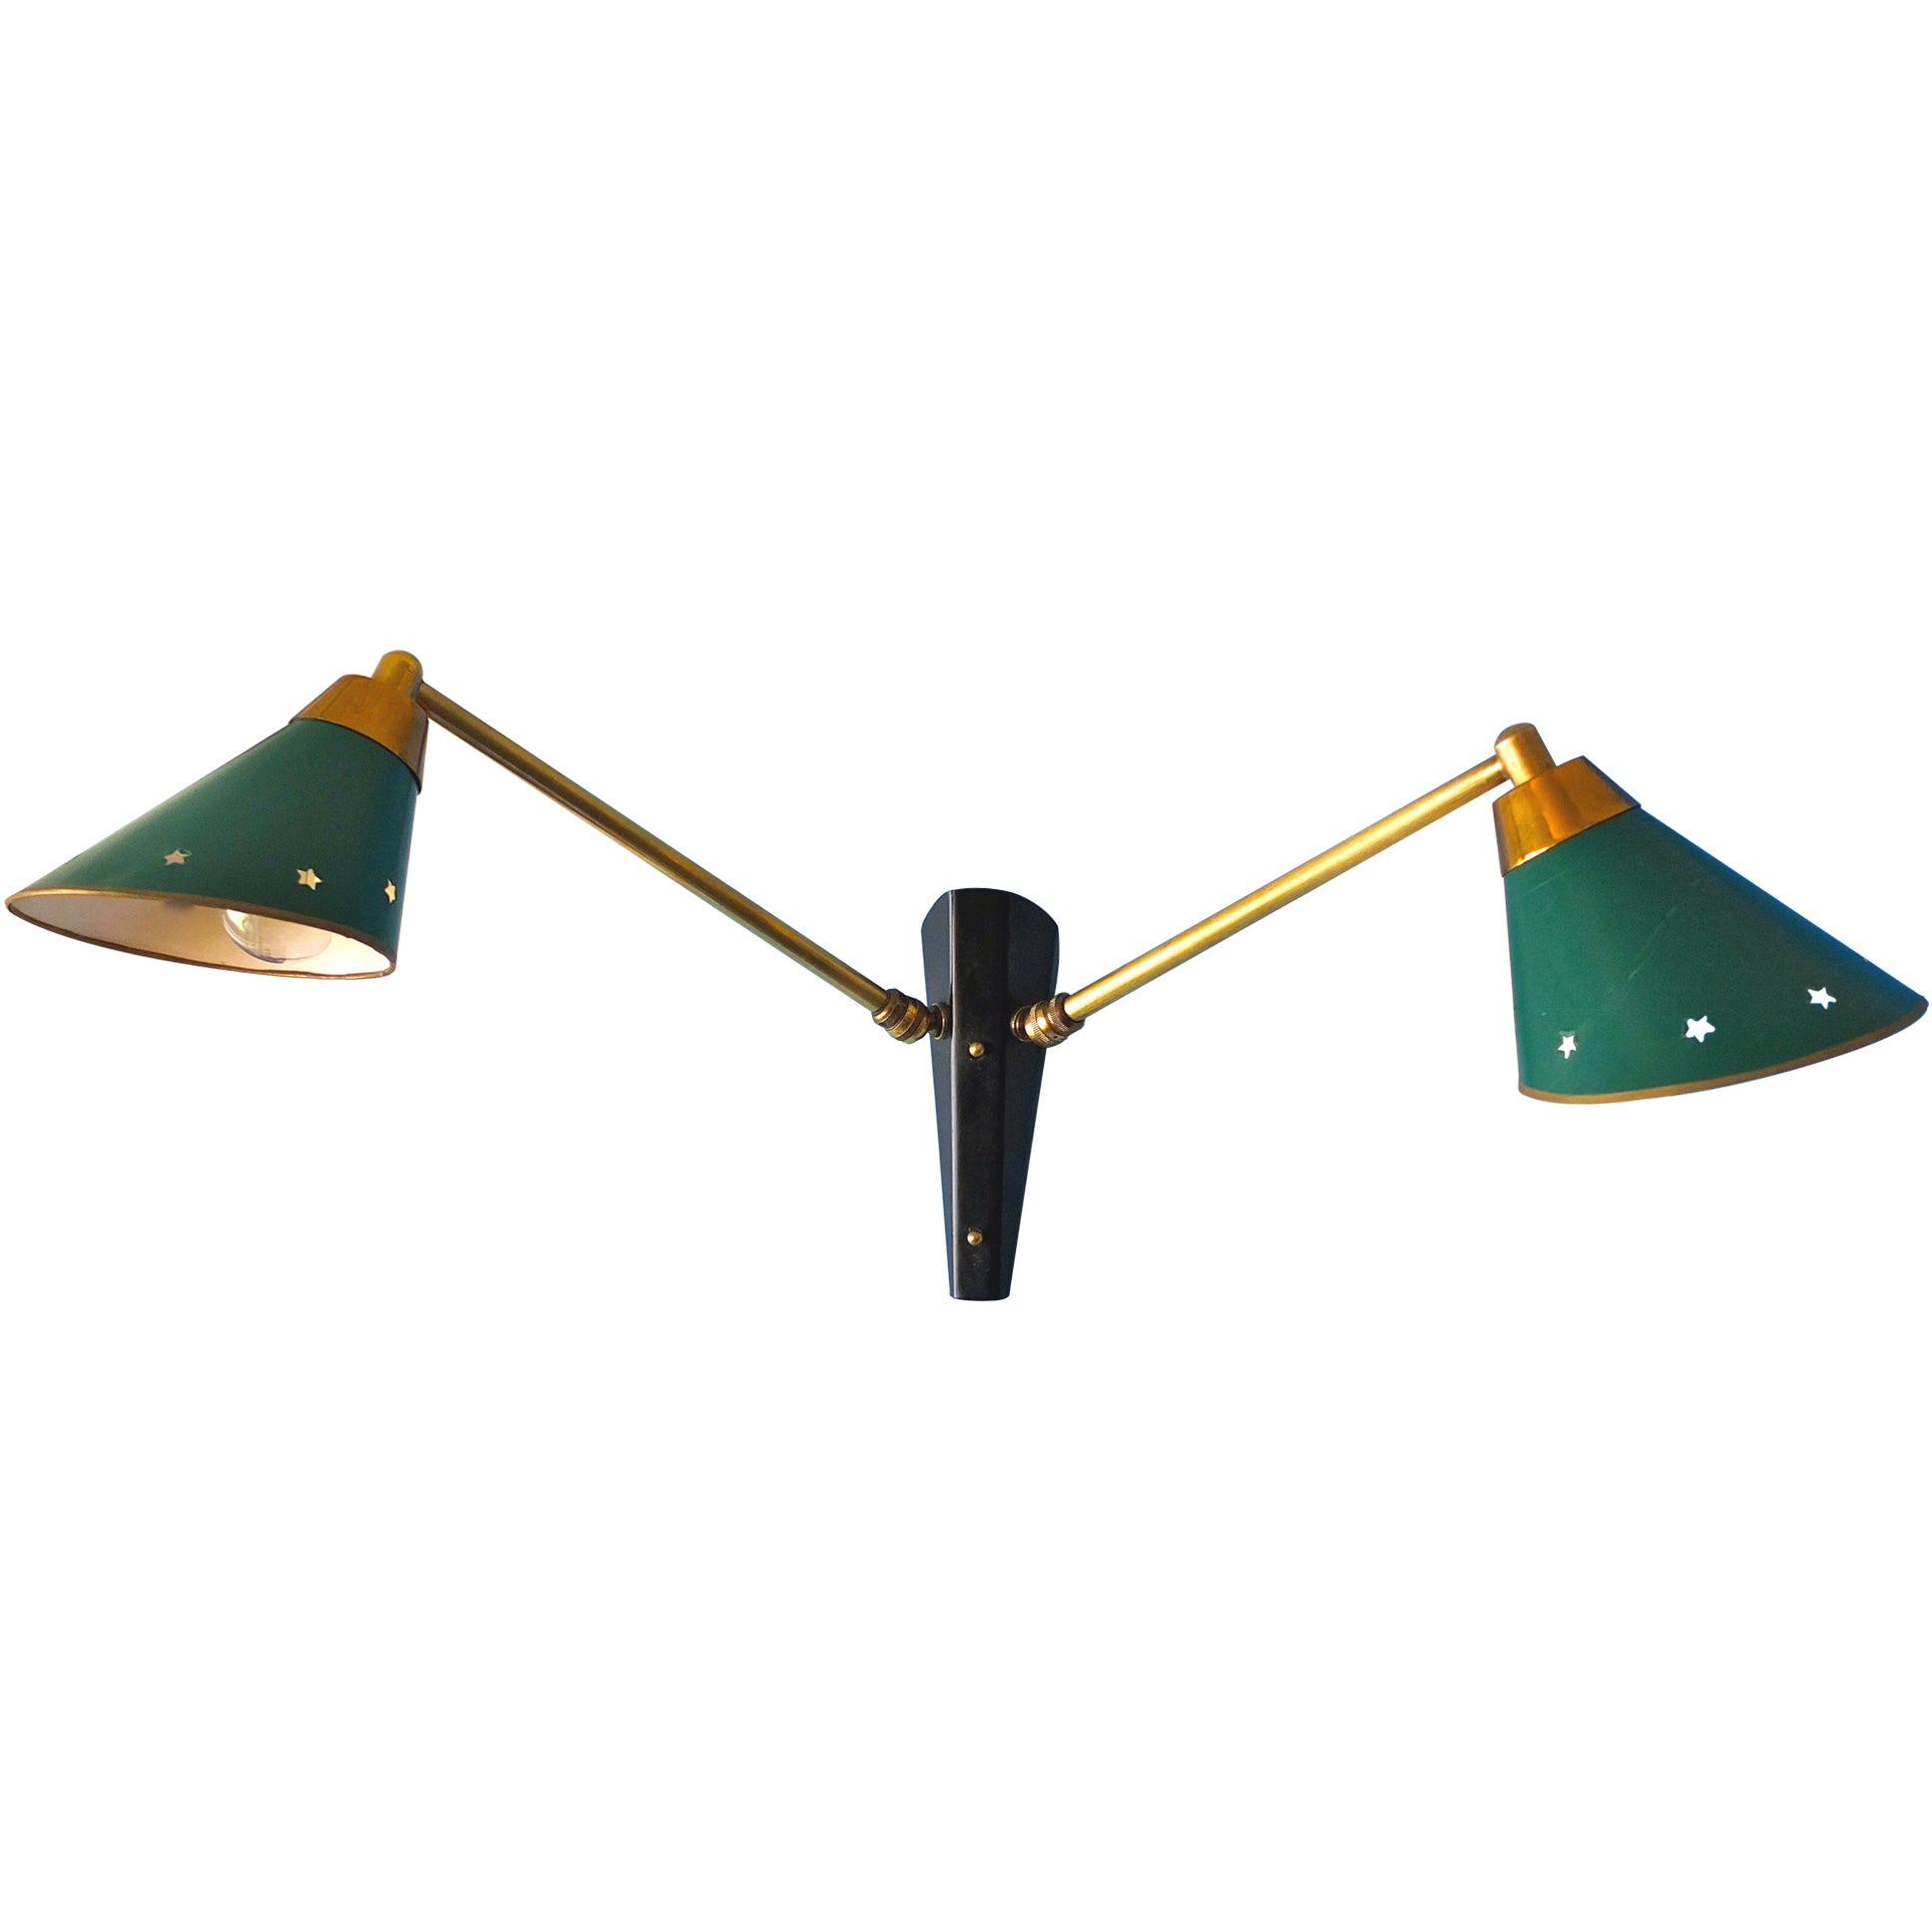 French 1950's Double Articulating Wall Sconce